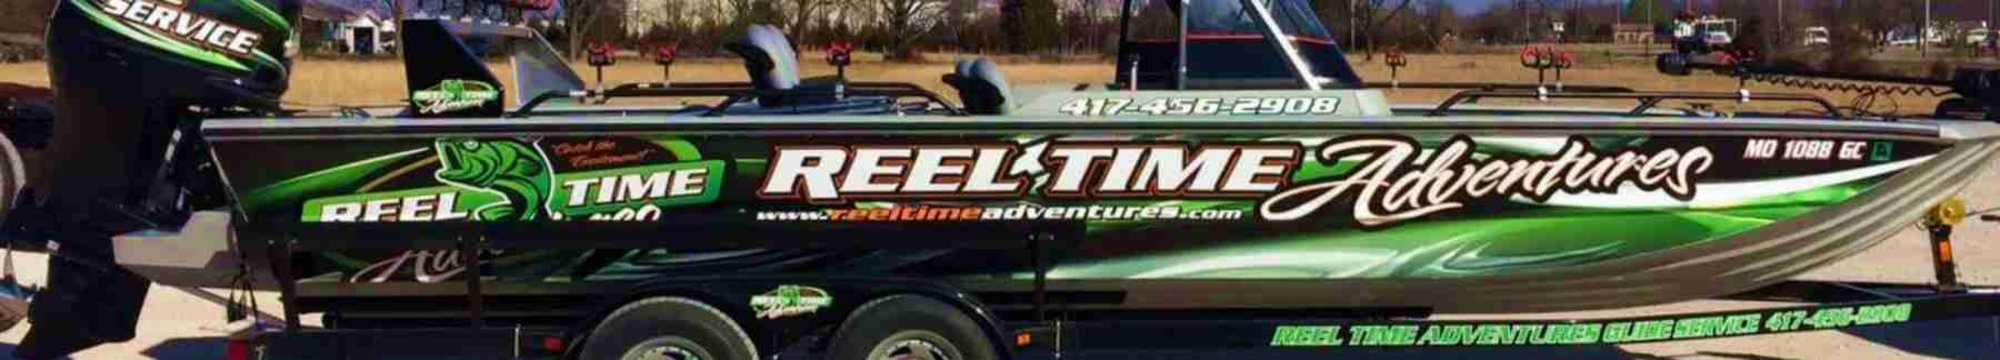 Reel Time Adventure Guide Service 